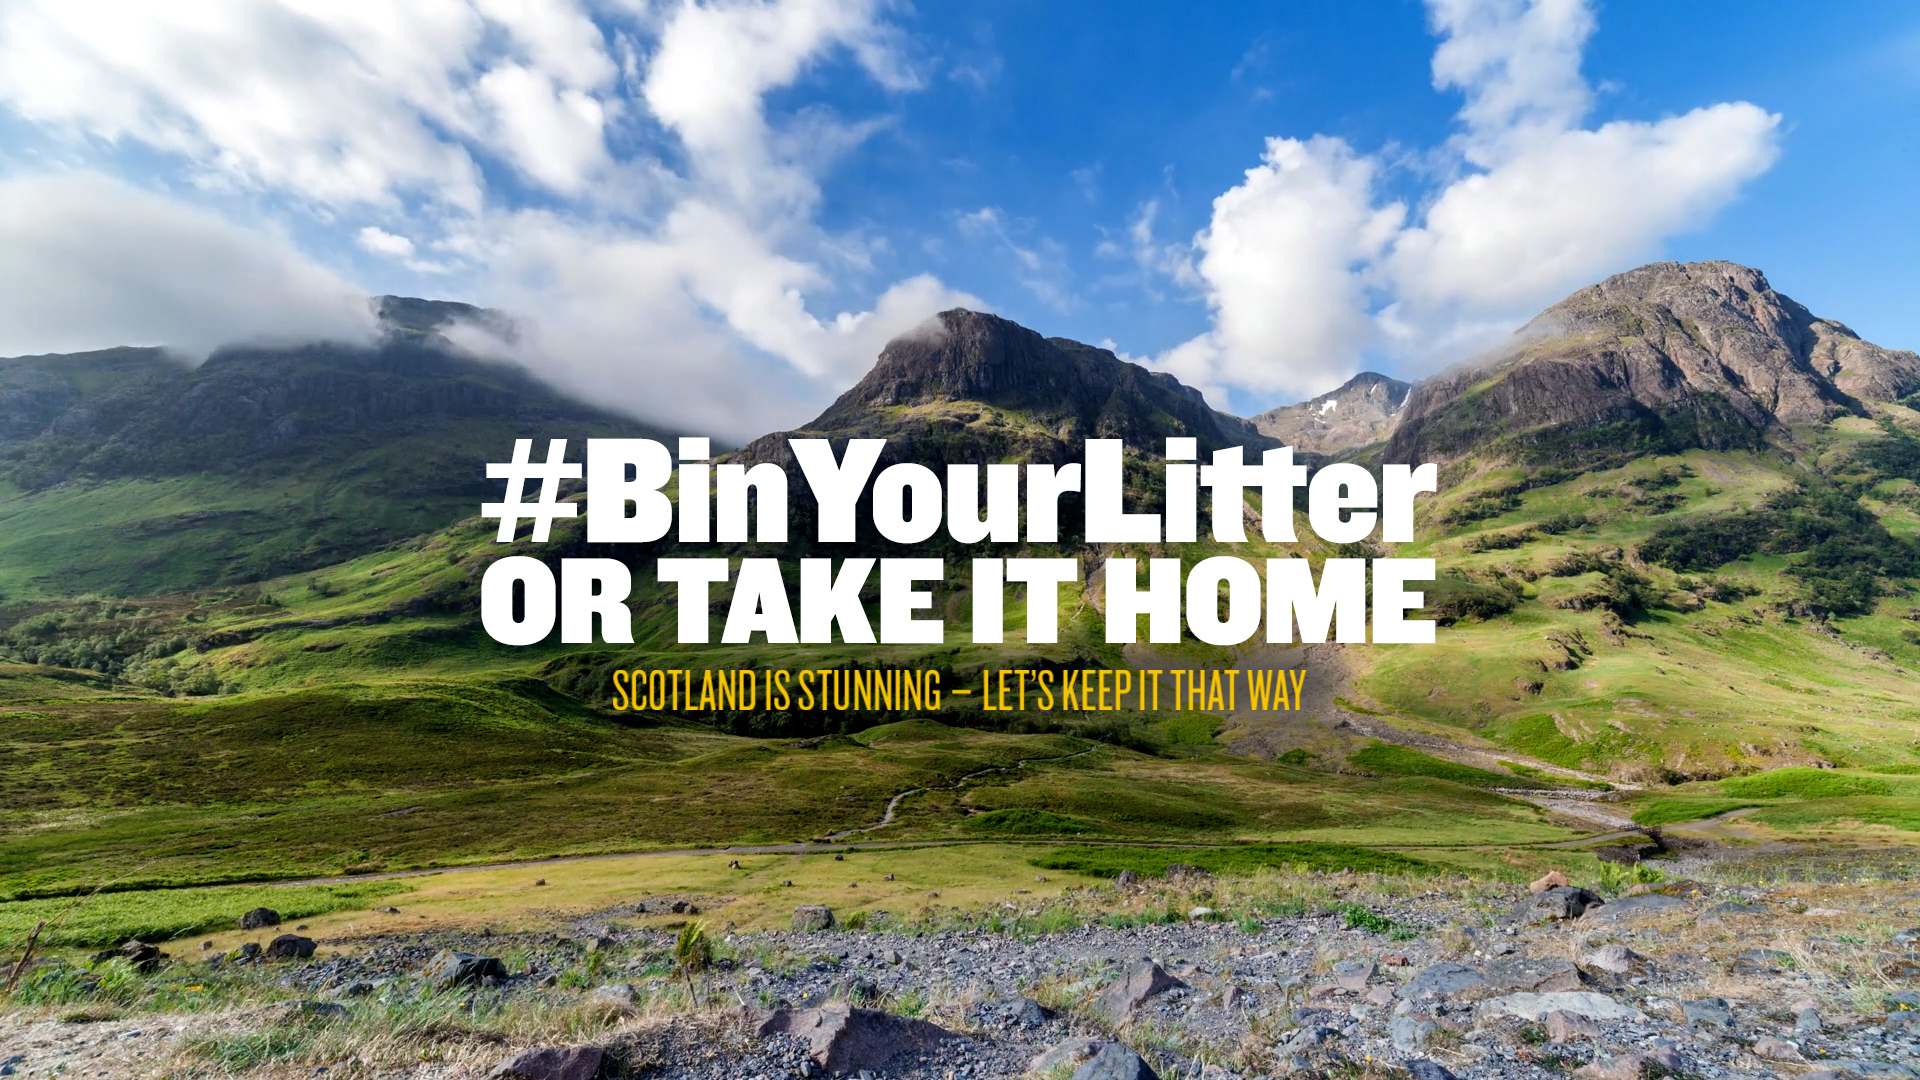 Scotland is Stunning – Let’s Keep it that Way